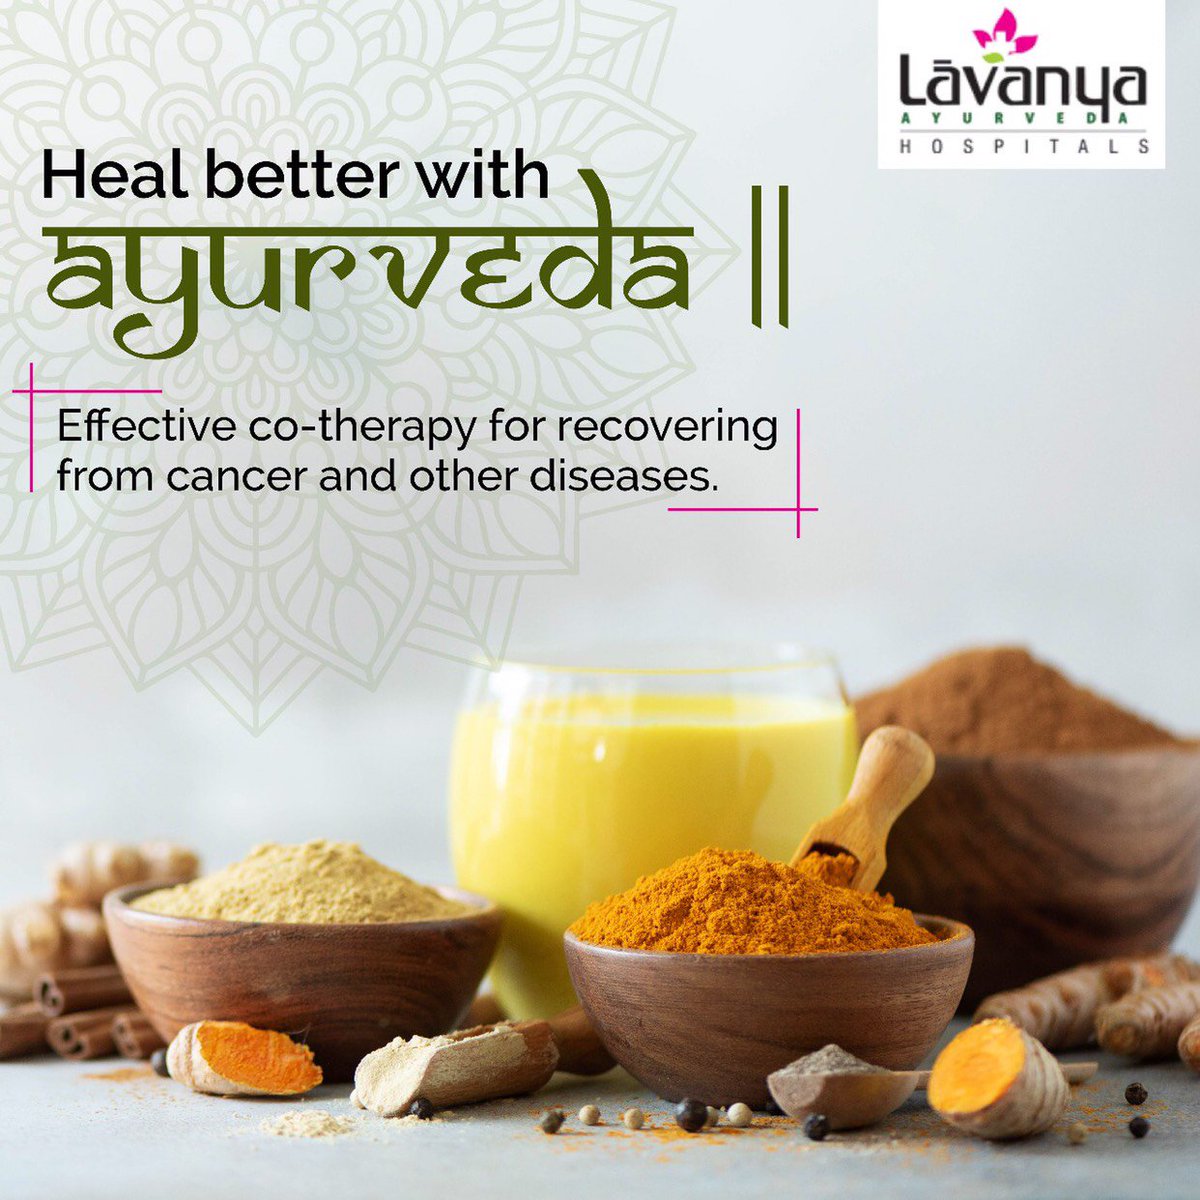 Contact us to know more about Ayurvedic remedies and treatment for an effective healing journey. Call us at 9838506878.
.
.
.
#ayurveda #ayurvedalife #AyurvedaEveryday #ayurvedafood #ayurvedaheals #ayurvedalifestyle #ayurvedatreatment #cancer #cancertreatment #ayurvedaclinic